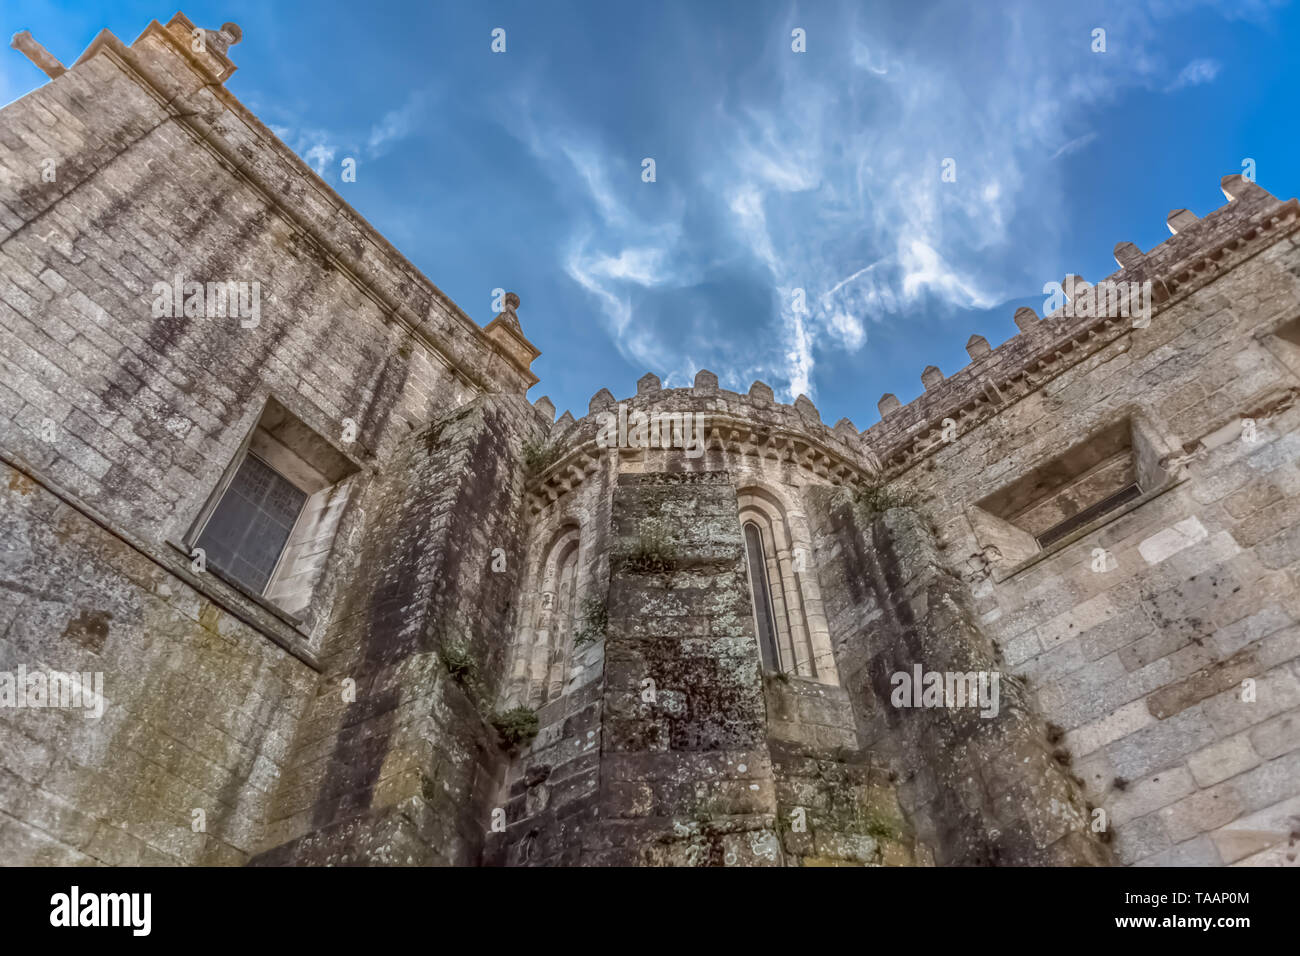 Viseu / Portugal - 04 16 2019 : Detailed view at the back facade of the Cathedral of Viseu, Sé Cathedral de Viseu, architectural icon of the city of V Stock Photo